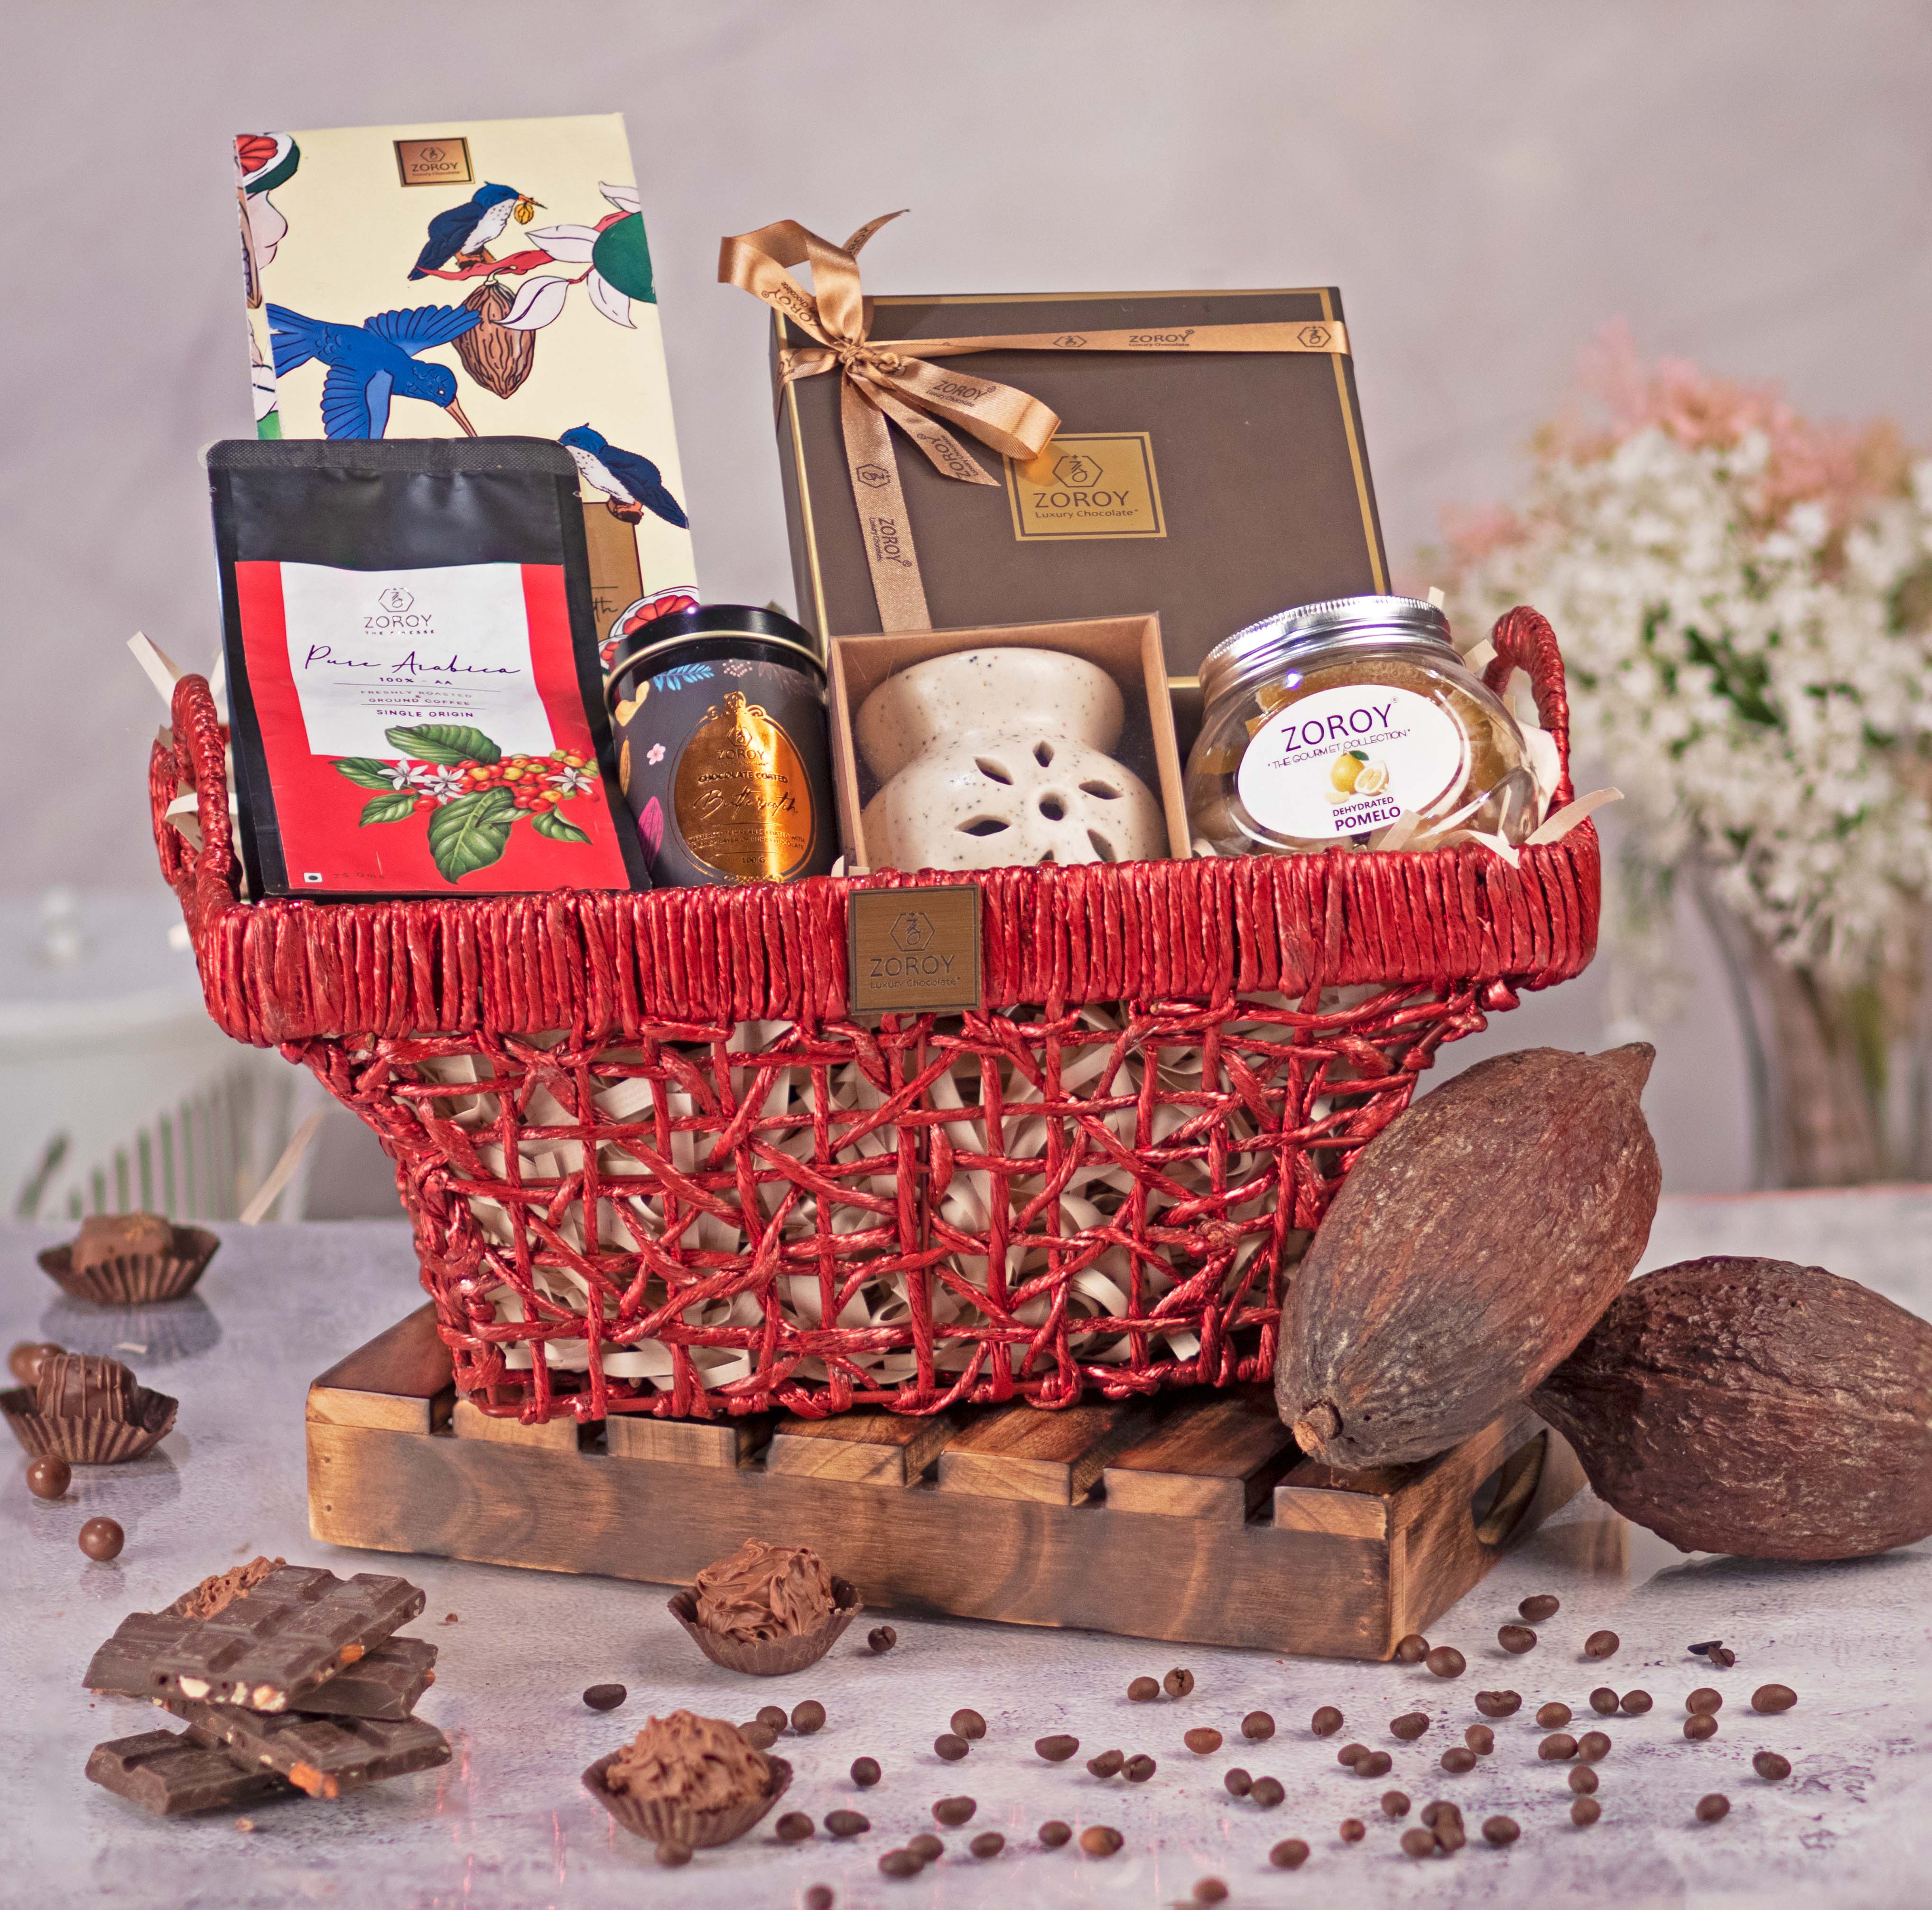 8 Exquisite Diwali Hampers That'll Make for a Perfect Gift | LBB